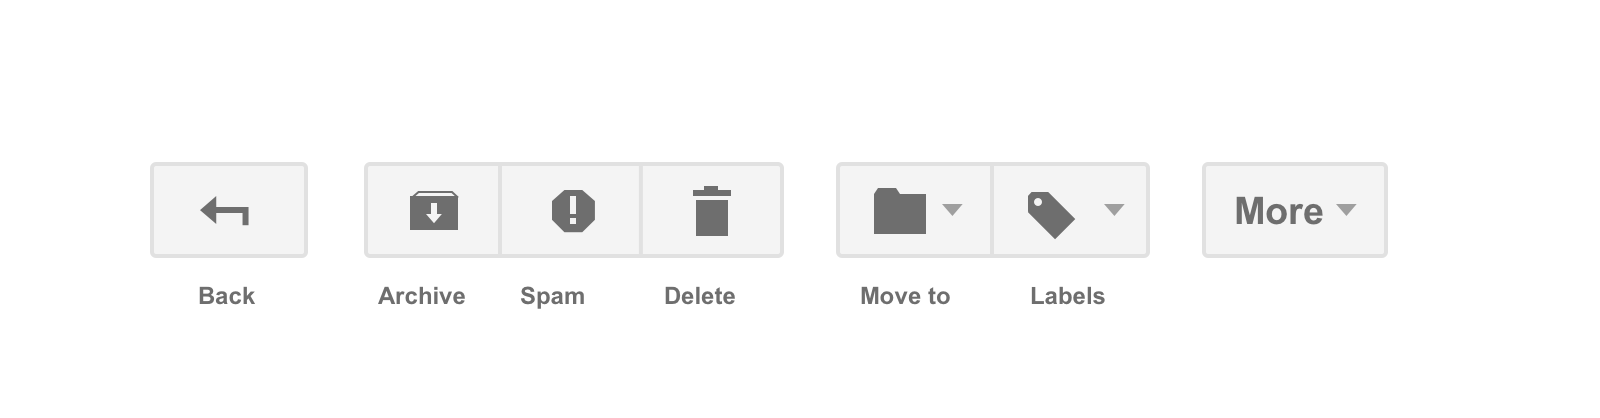 gmail-icon-with-labels.png